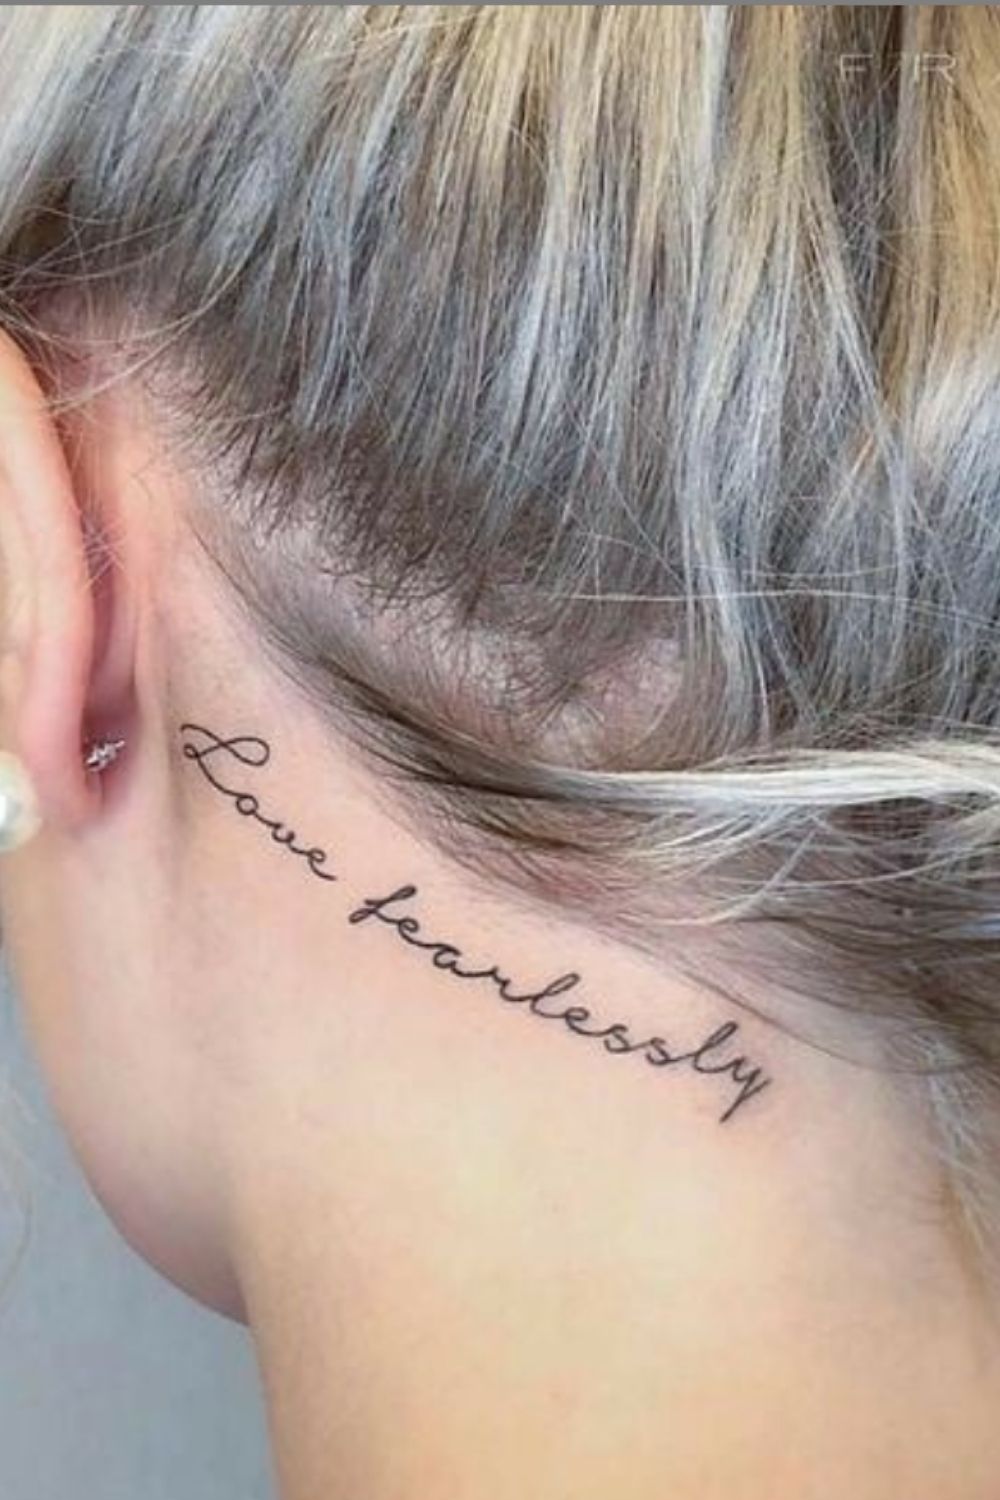 Behind Ear Tattoo: 40 Tiny Tattoo Designs For Girls To Try!